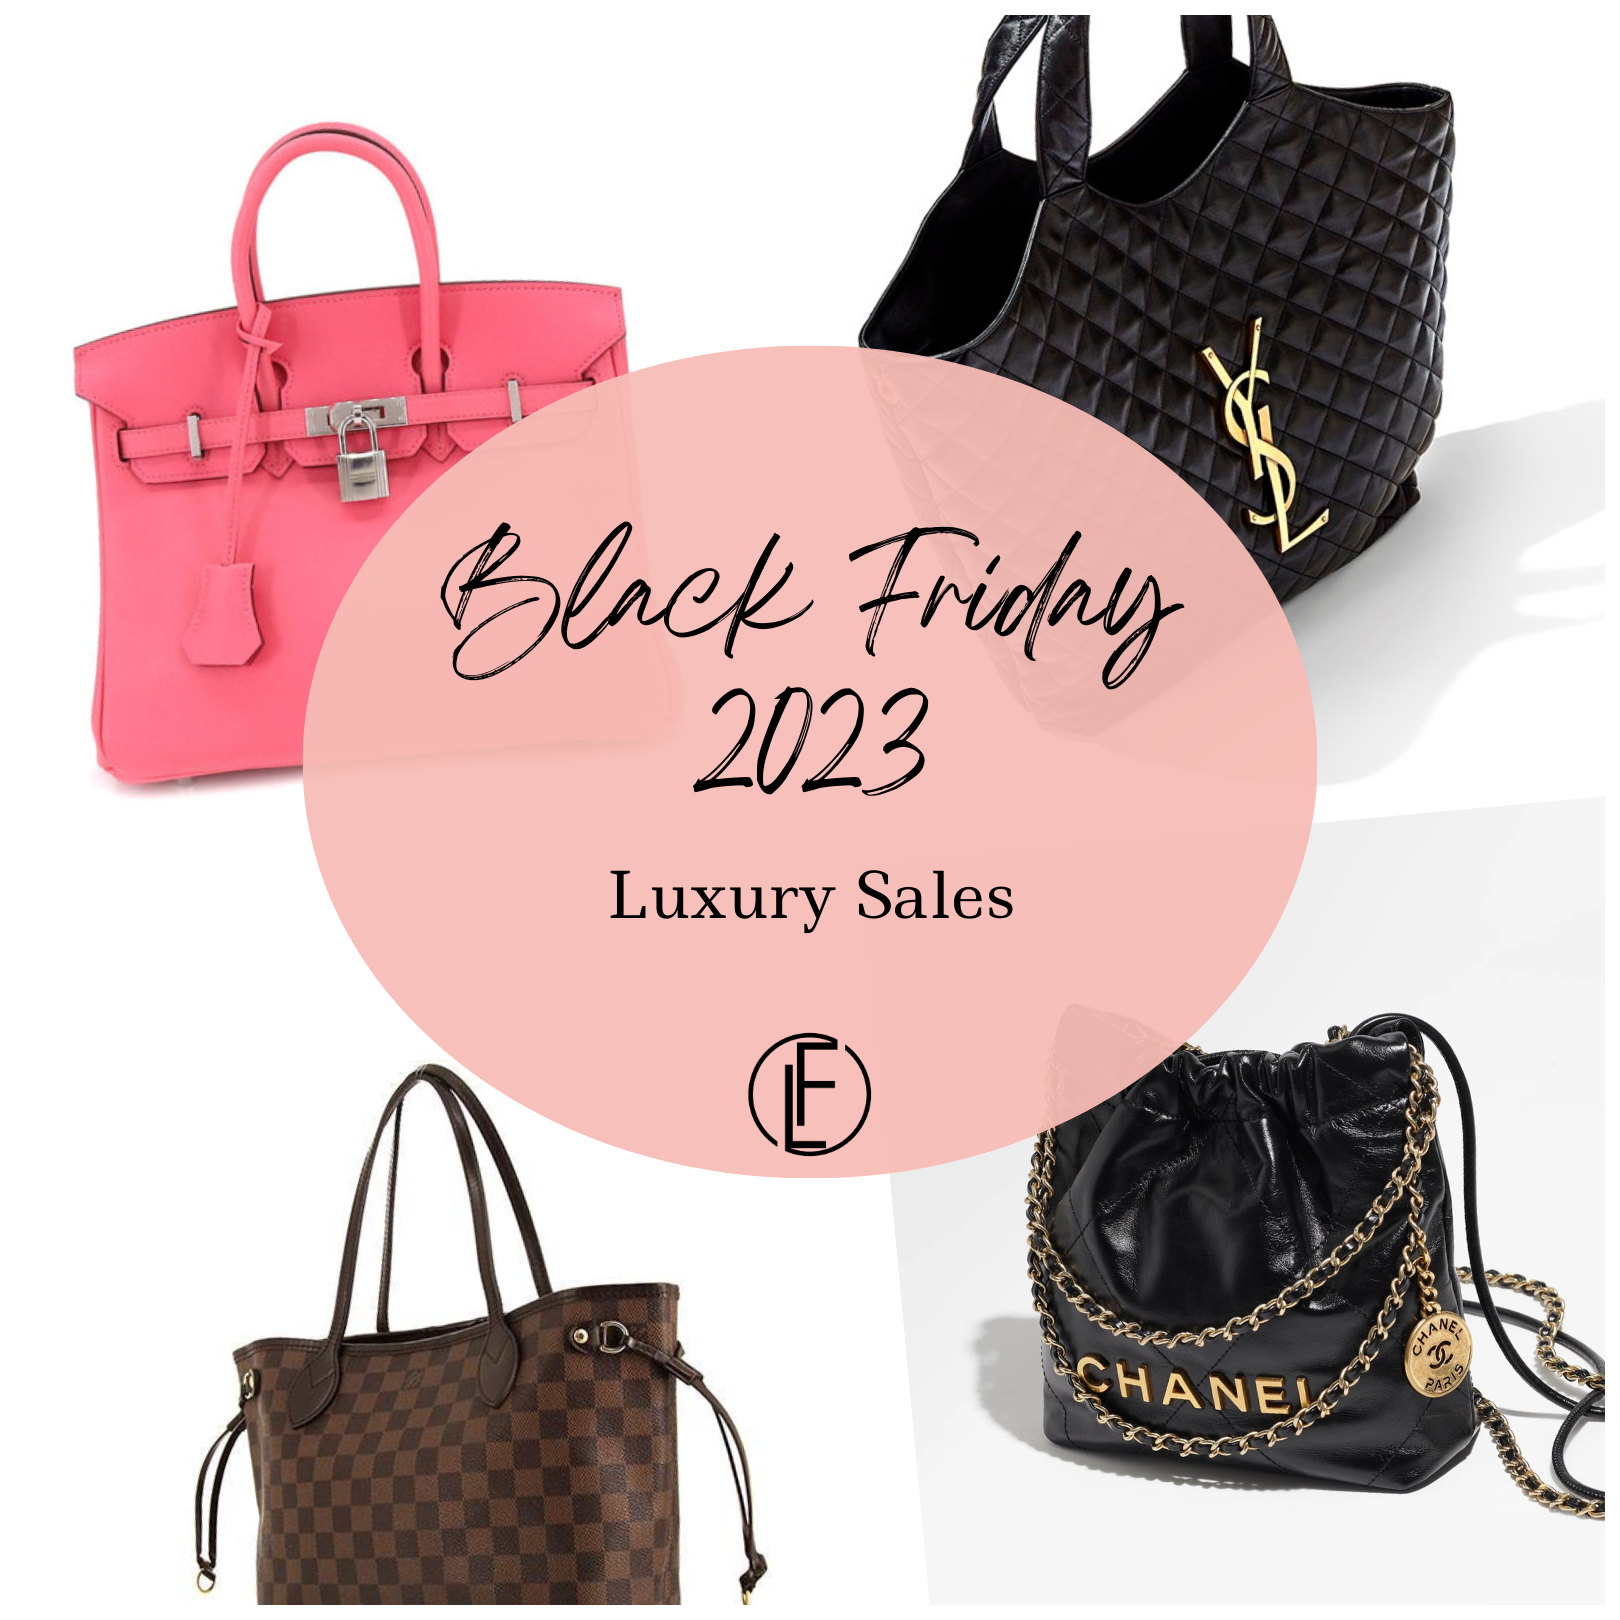 Fashionphile 2023 Black Friday Sale. The Most Dreamy Bags On Sale!